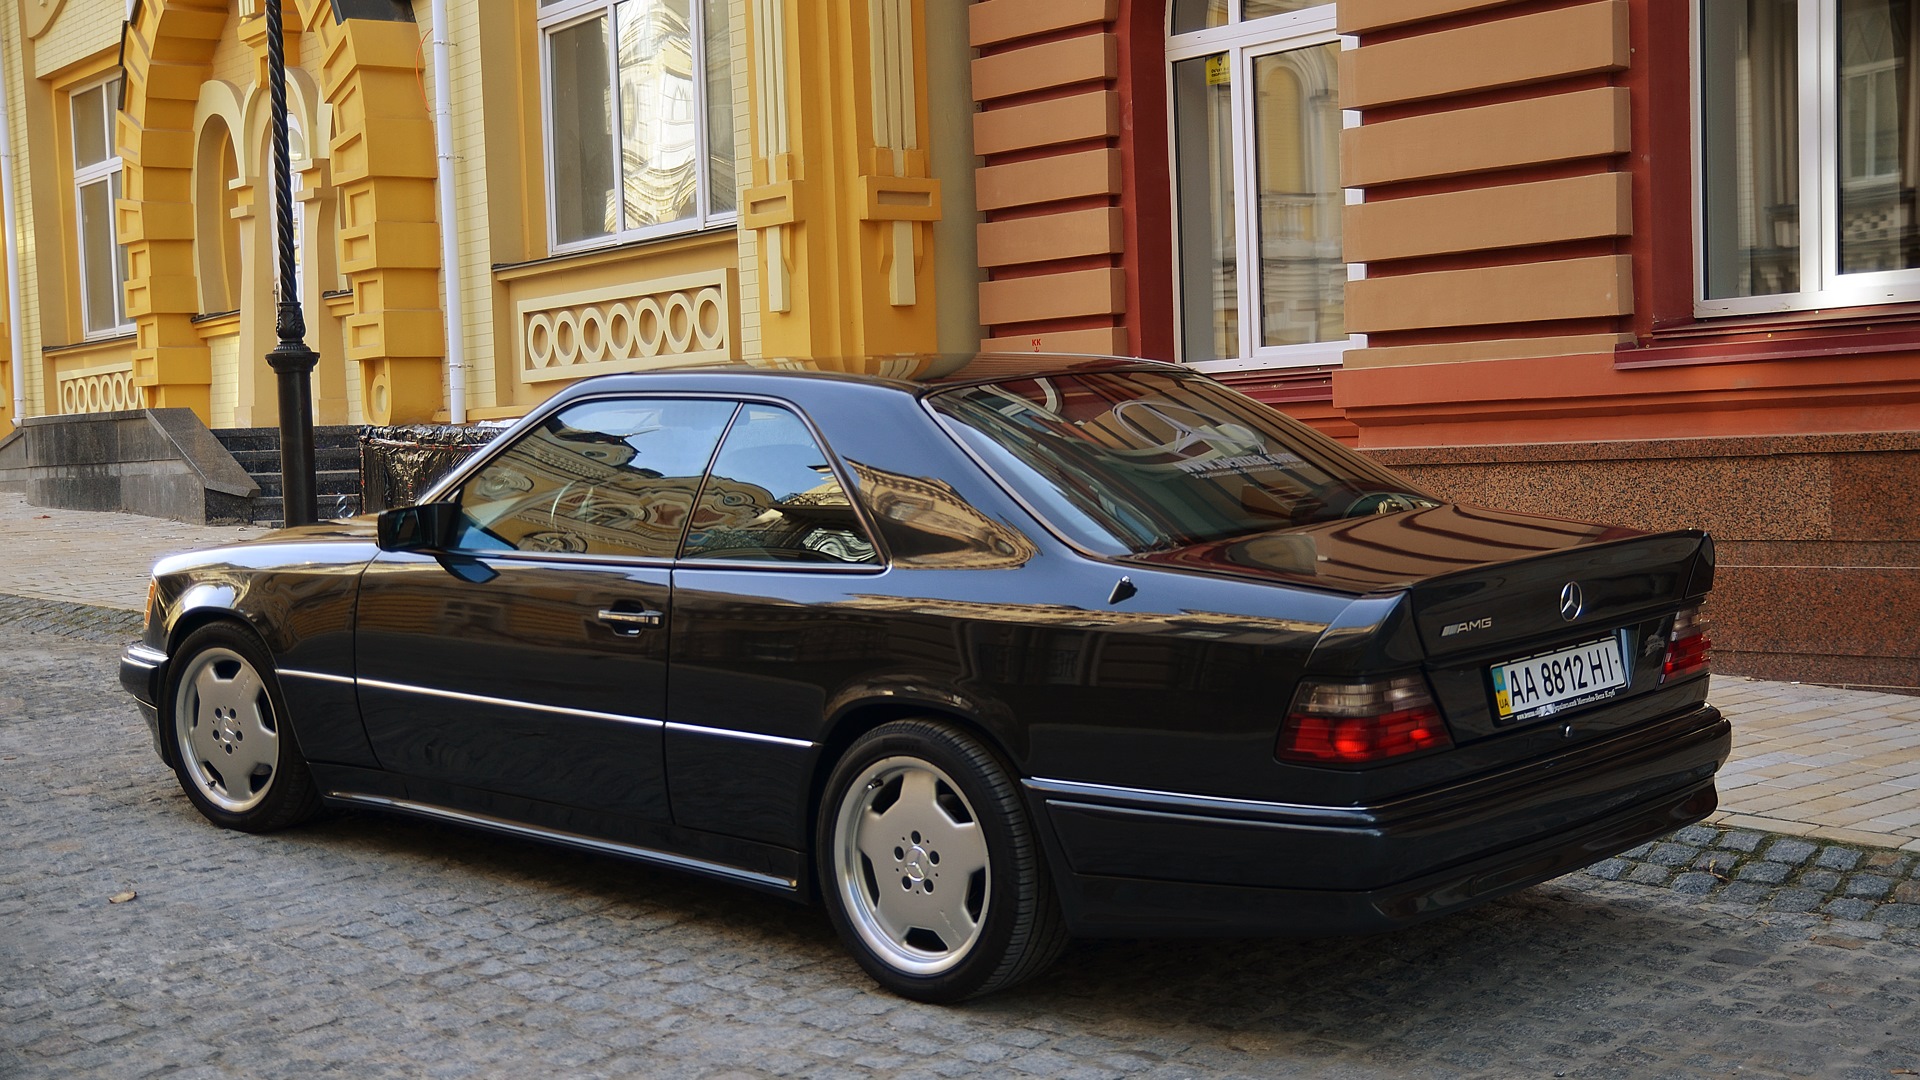 W124 coupe. Мерседес 124 купе. Мерседес Бенц 124 купе. Мерседес w124 купе. W124 Coupe AMG.